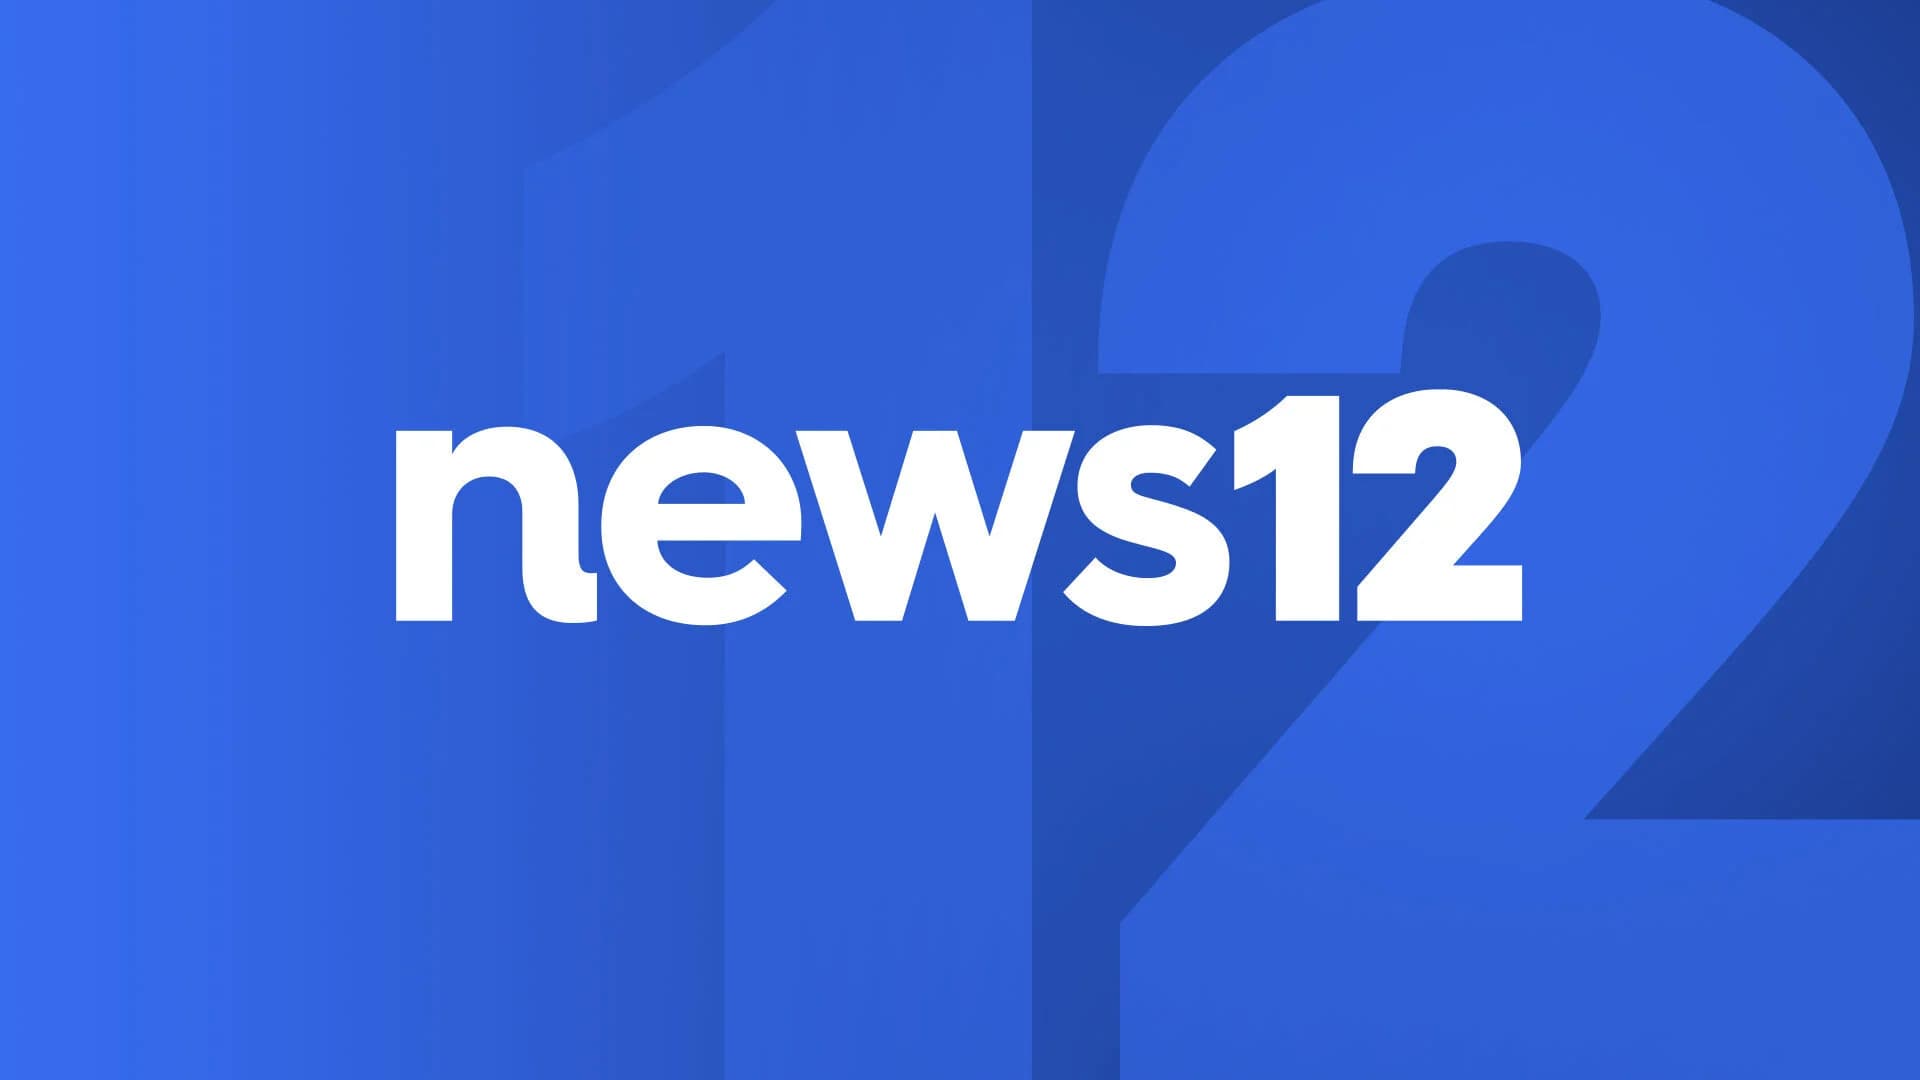 News 12 feedback and comments